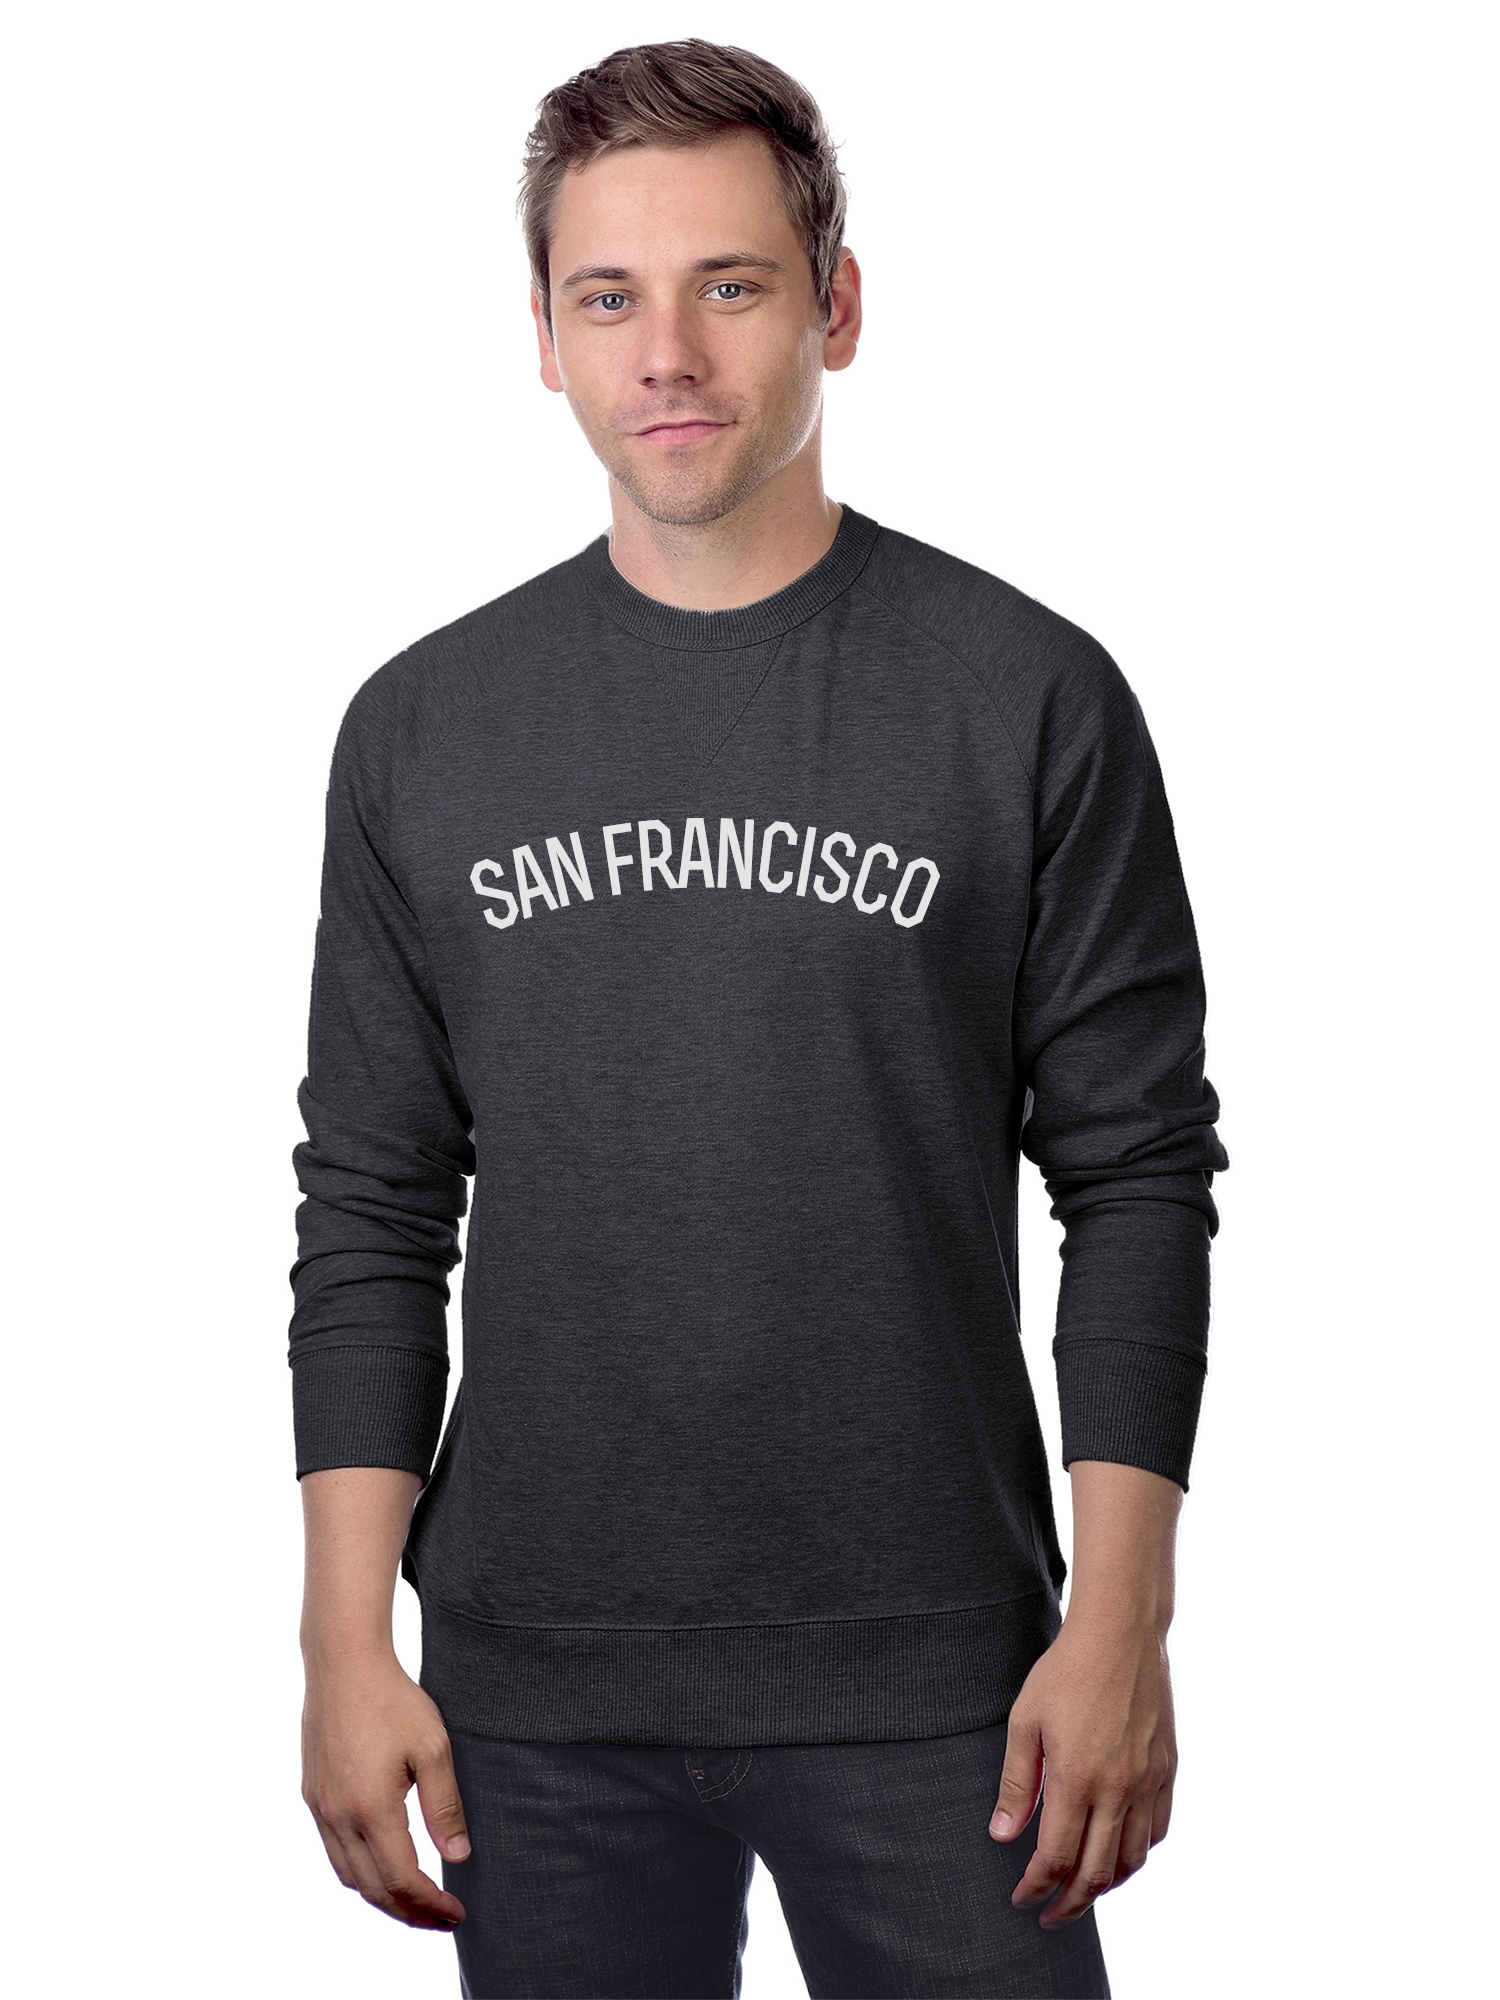 Daxton San Francisco Sweatshirt Athletic Pullover Crewneck French Terry Fabric, HCharcoal Sweatshirt White Letters, XS - image 1 of 3